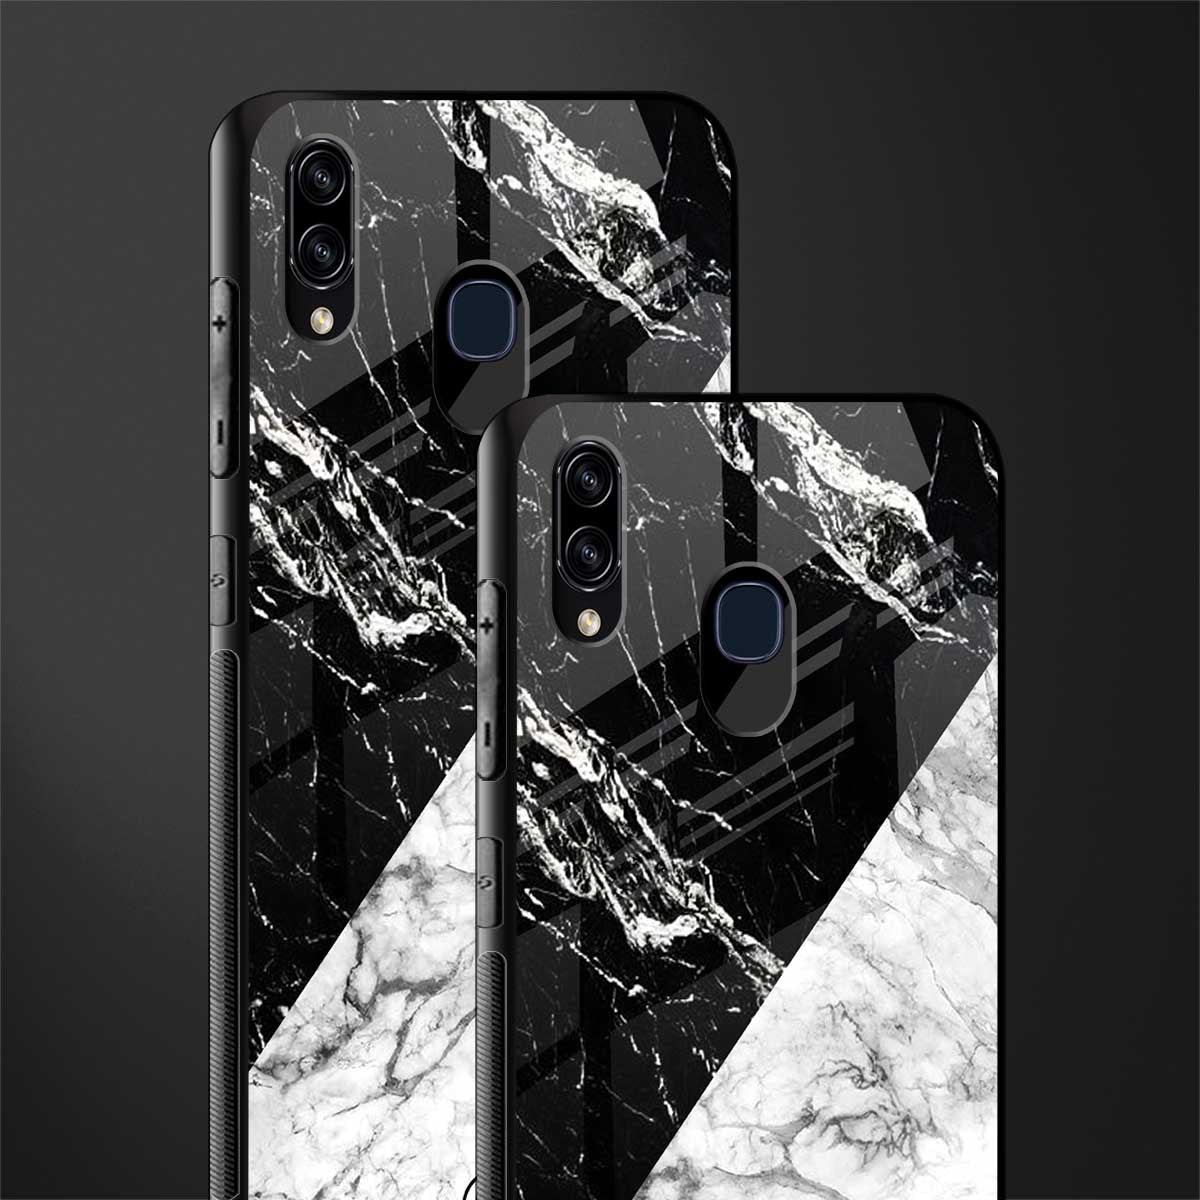 fatal contradiction phone cover for samsung galaxy m10s